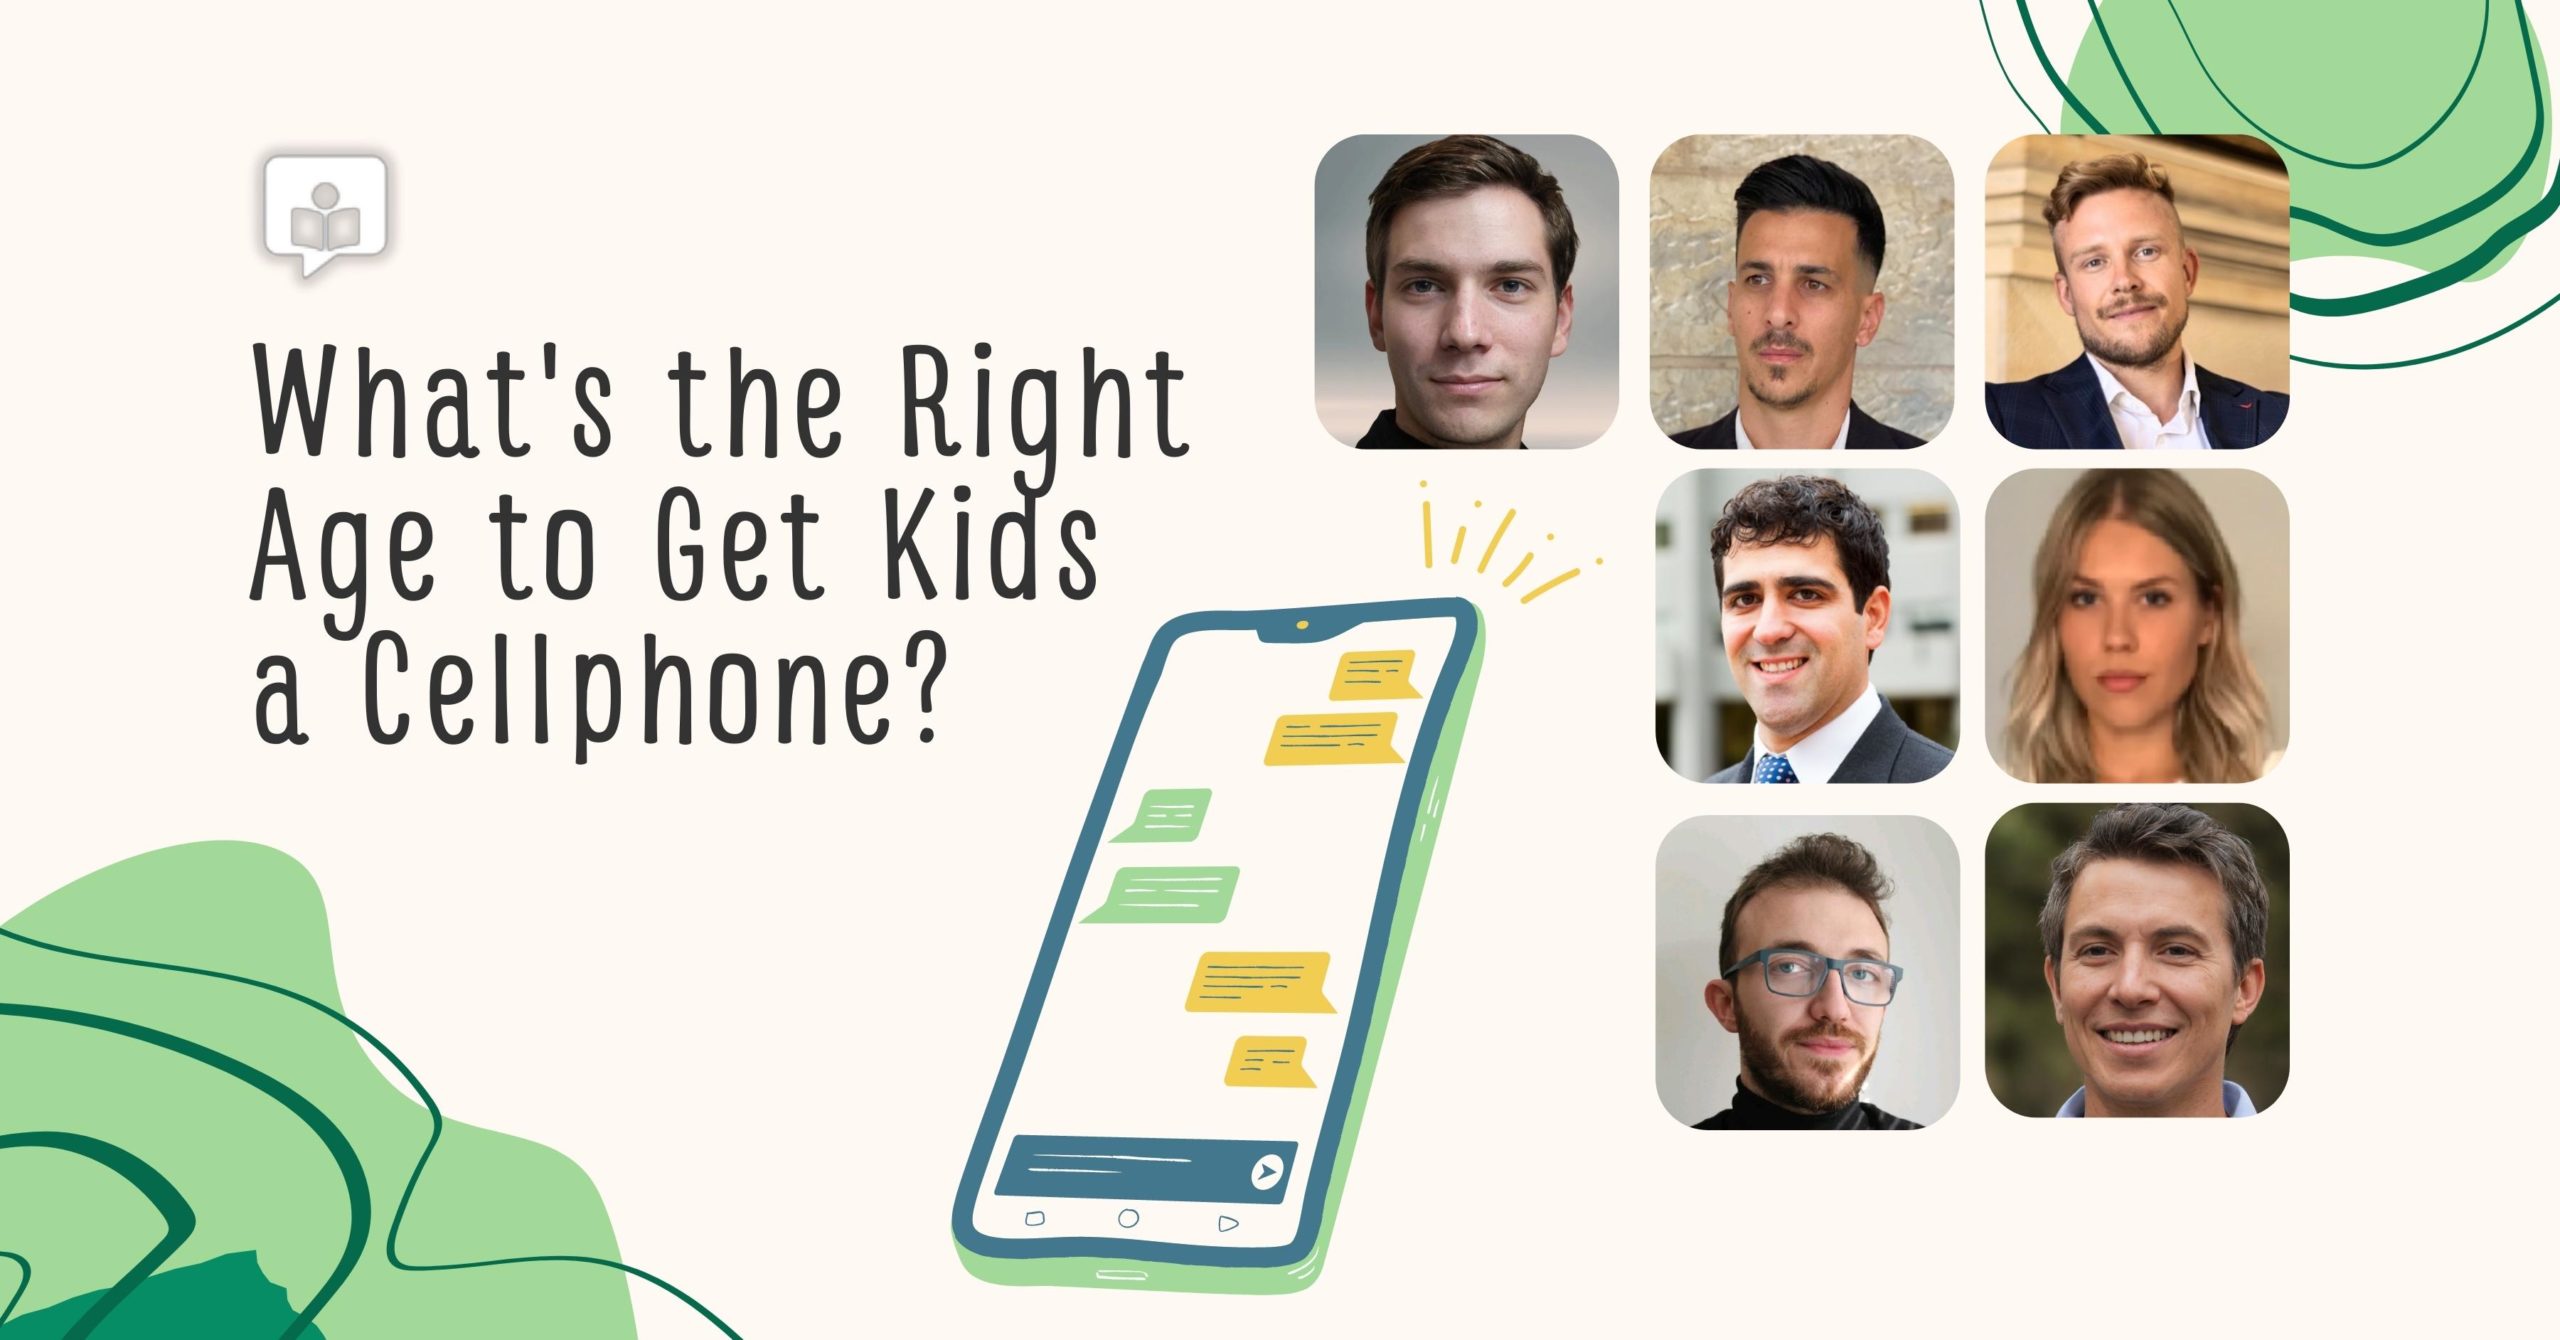 What's the Right Age to Get Kids a Cellphone